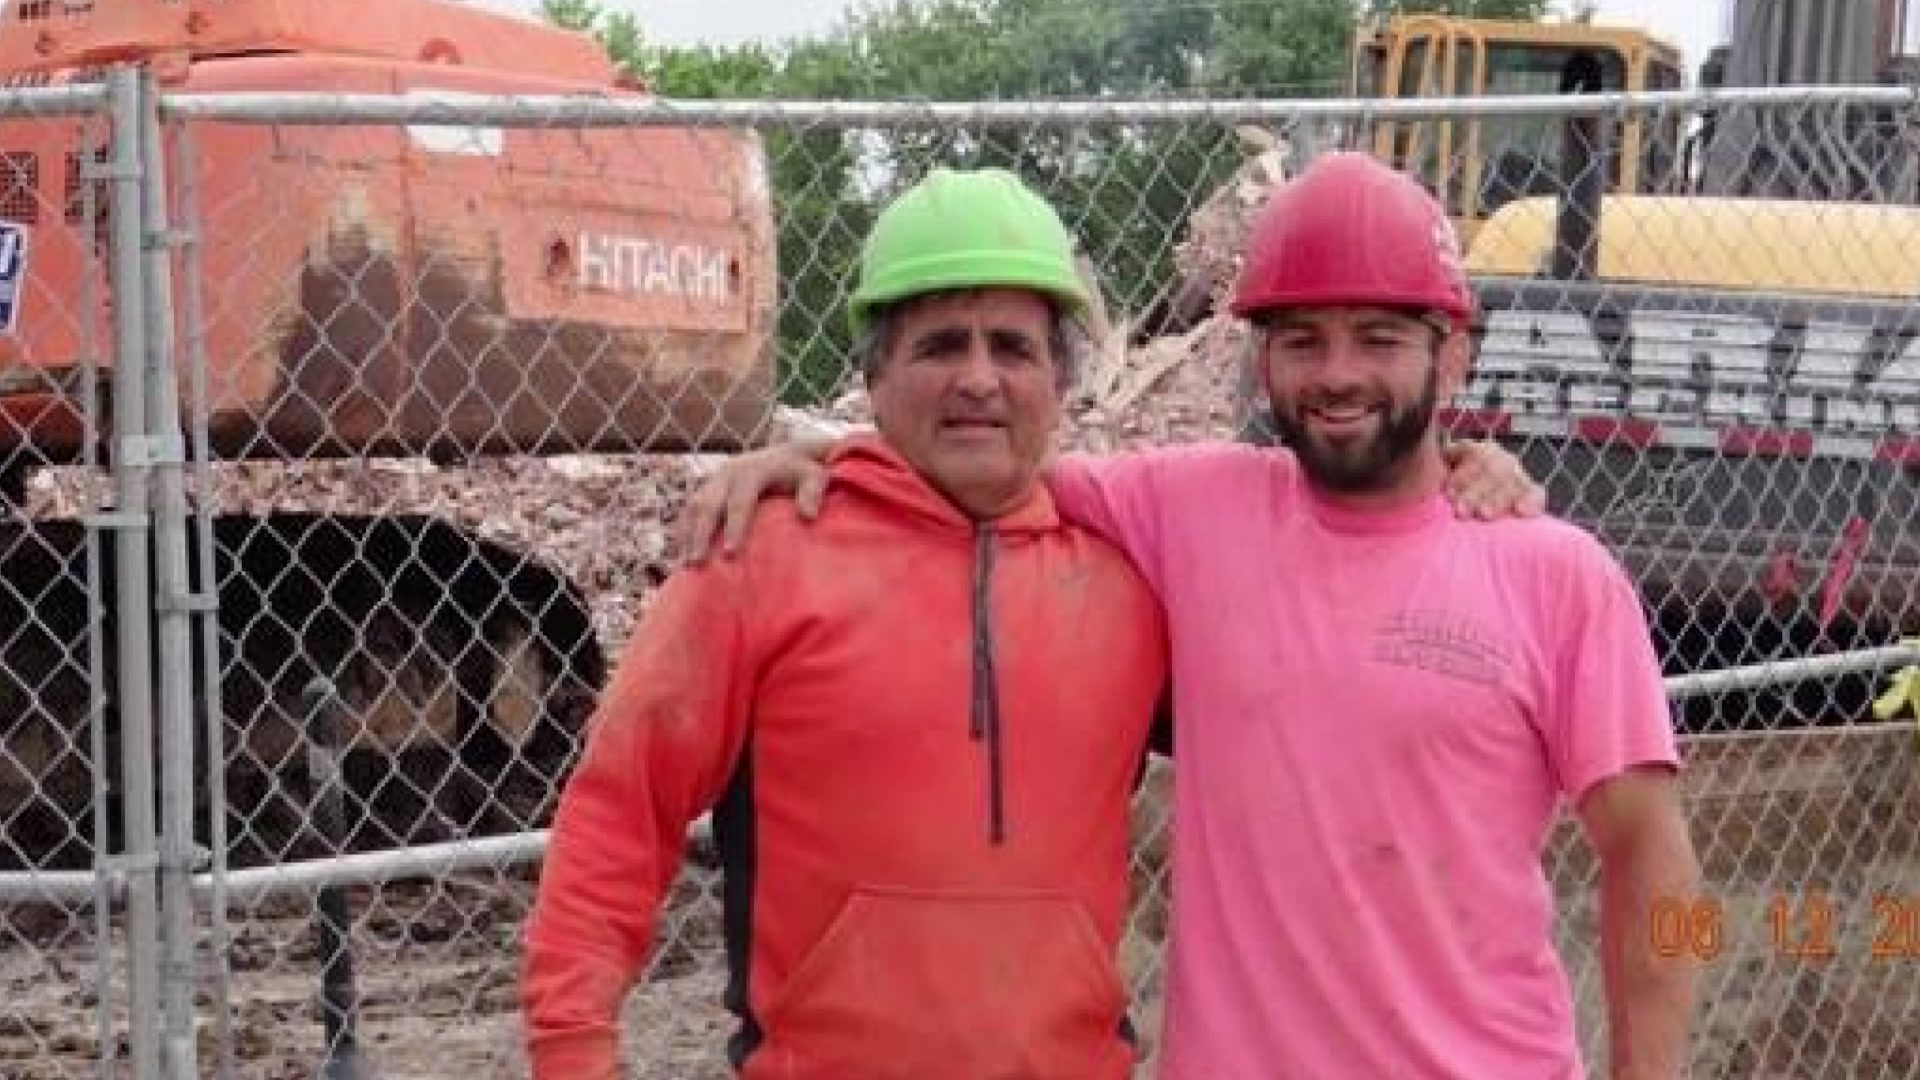 His Smile Was Contagious Loved Ones Remember Racine Man Killed In Construction Accident